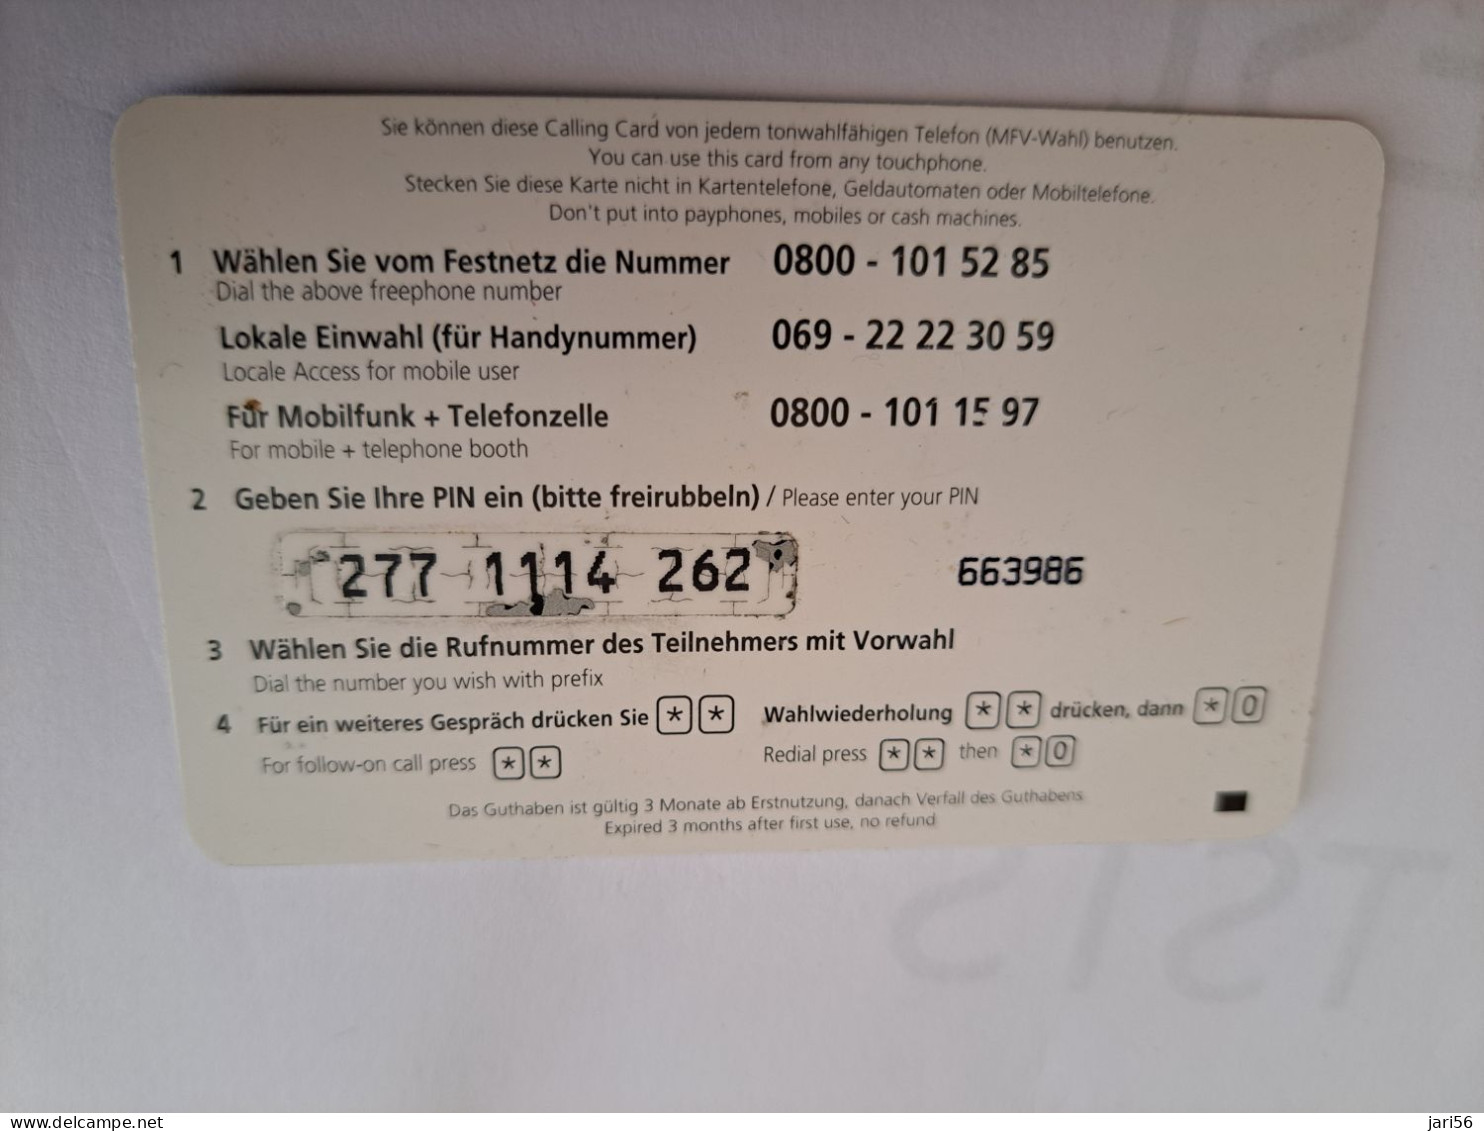 DUITSLAND/GERMANY  € 6,- / COM UNICATE/ IRAN  BUILDING      ON CARD        Fine Used  PREPAID  **16535** - [2] Mobile Phones, Refills And Prepaid Cards